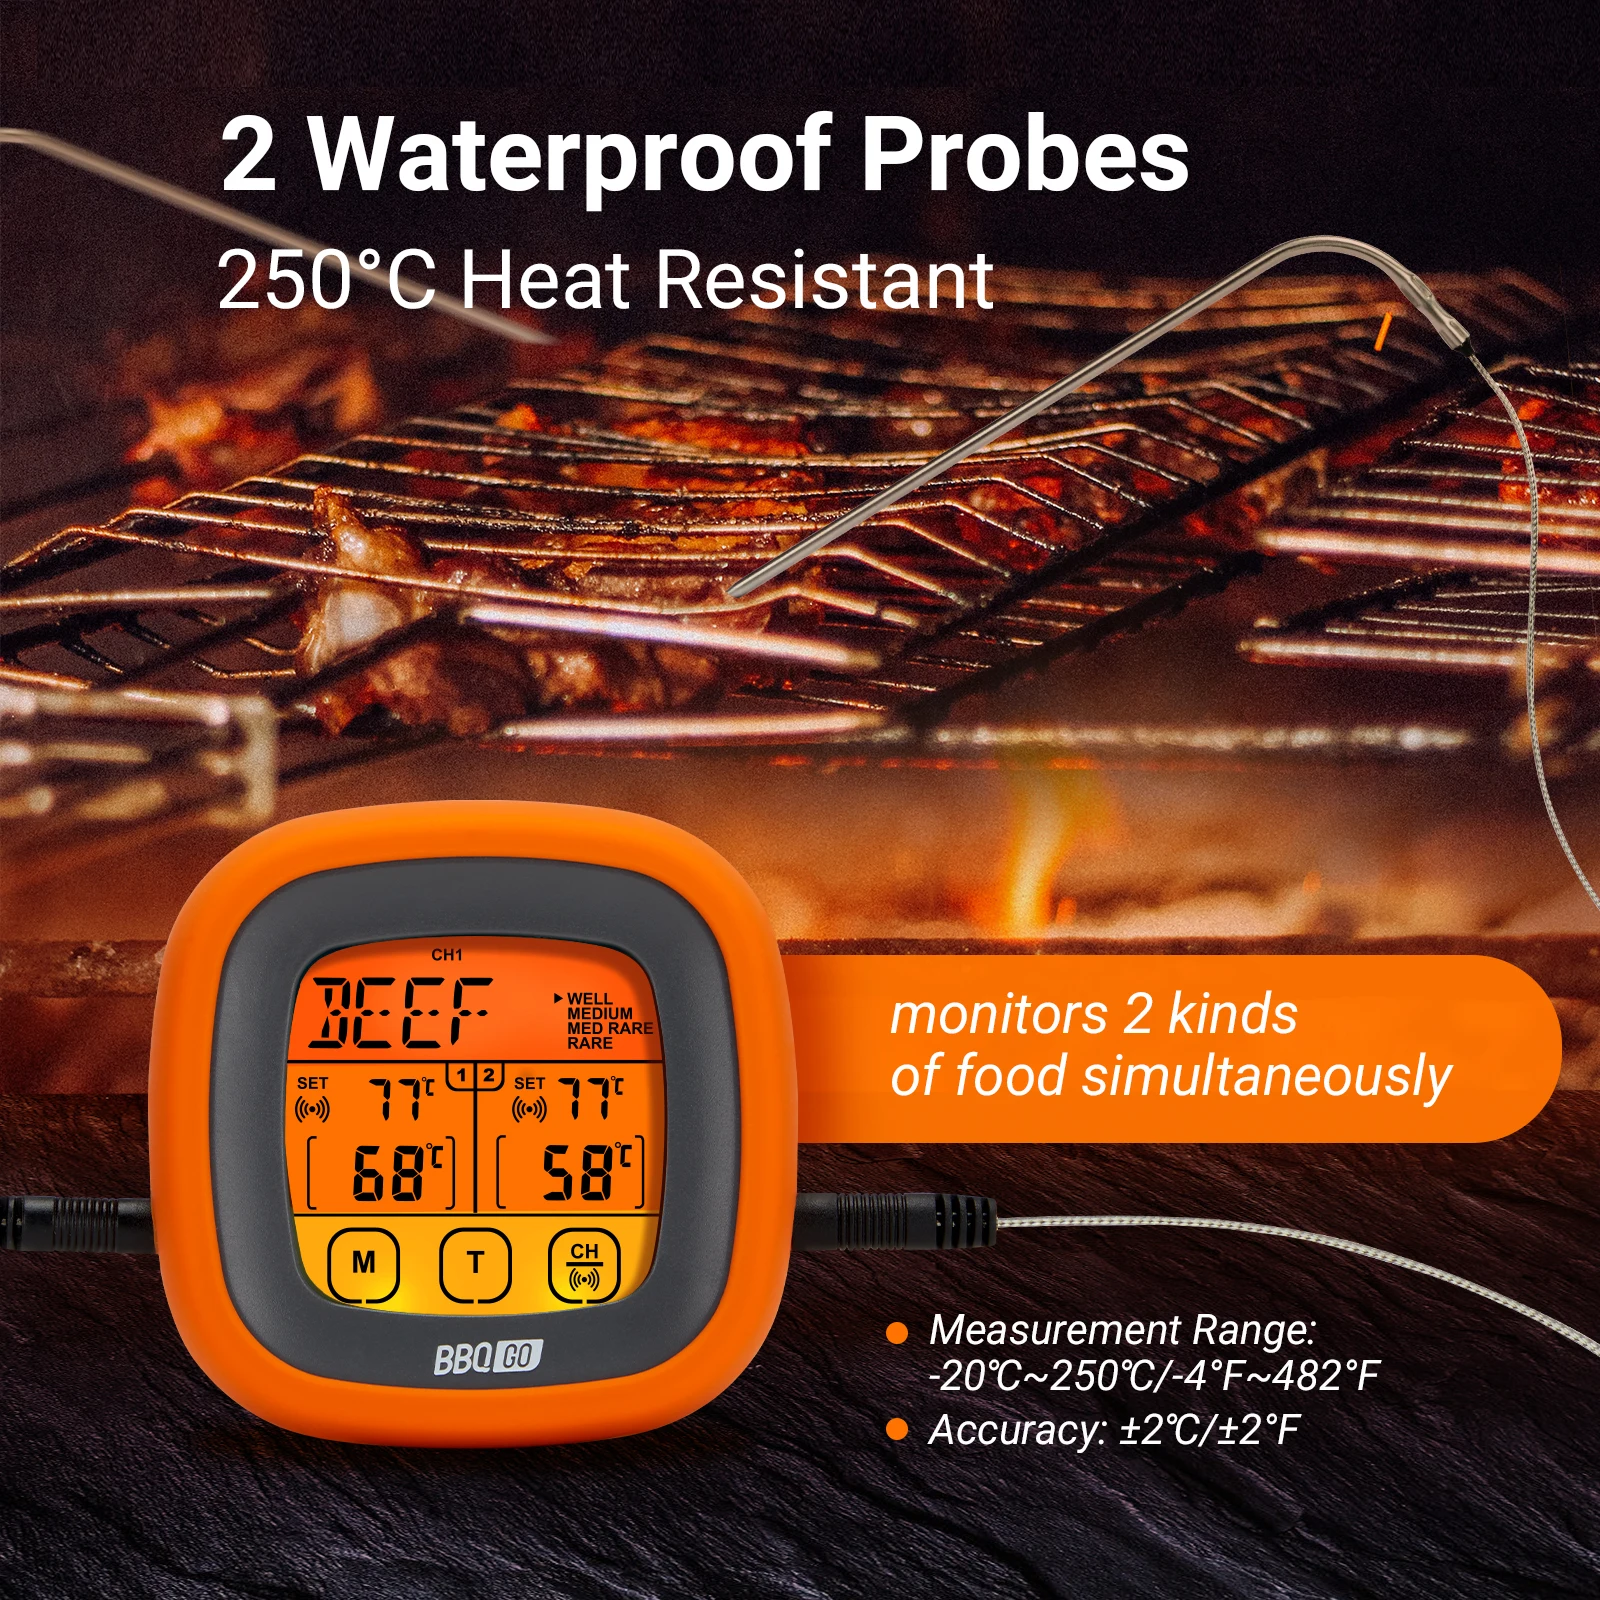 GIVEAWAY For INKBIRD Waterproof Bluetooth BBQ Thermometer with 4